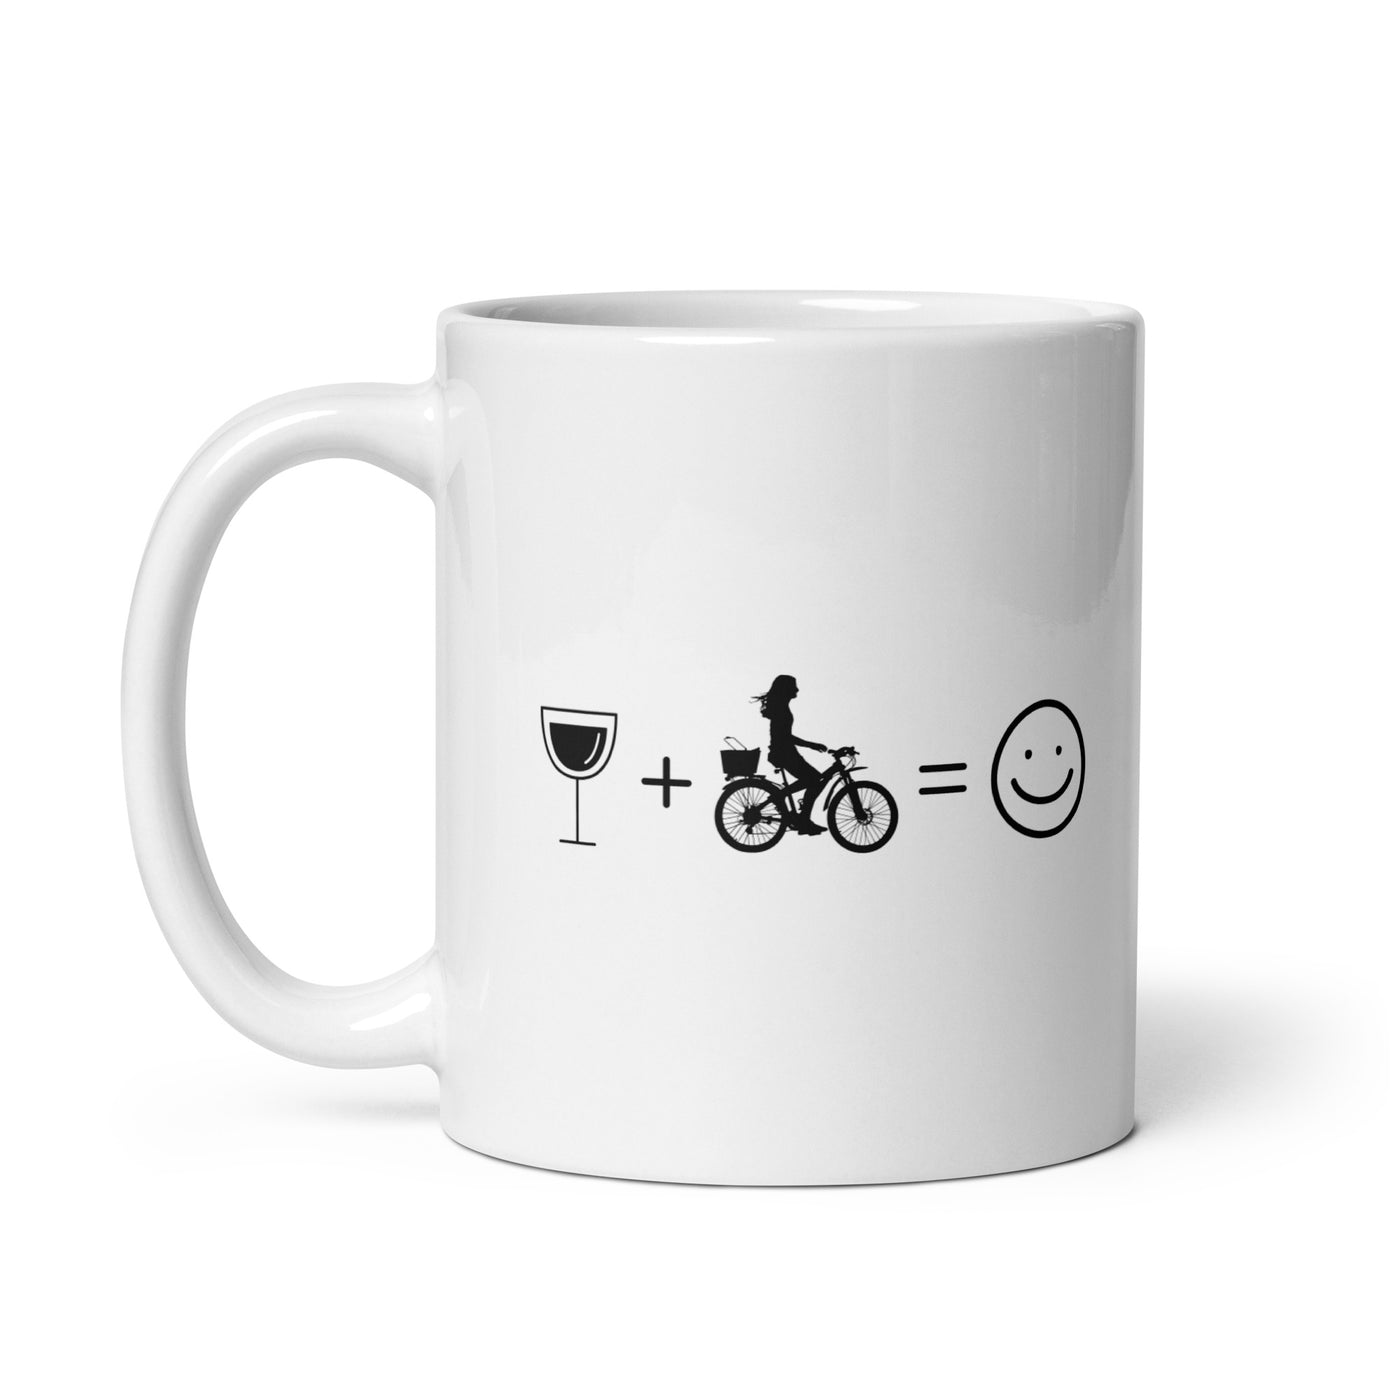 Wine Smile Face And Cycling 2 - Tasse fahrrad 11oz